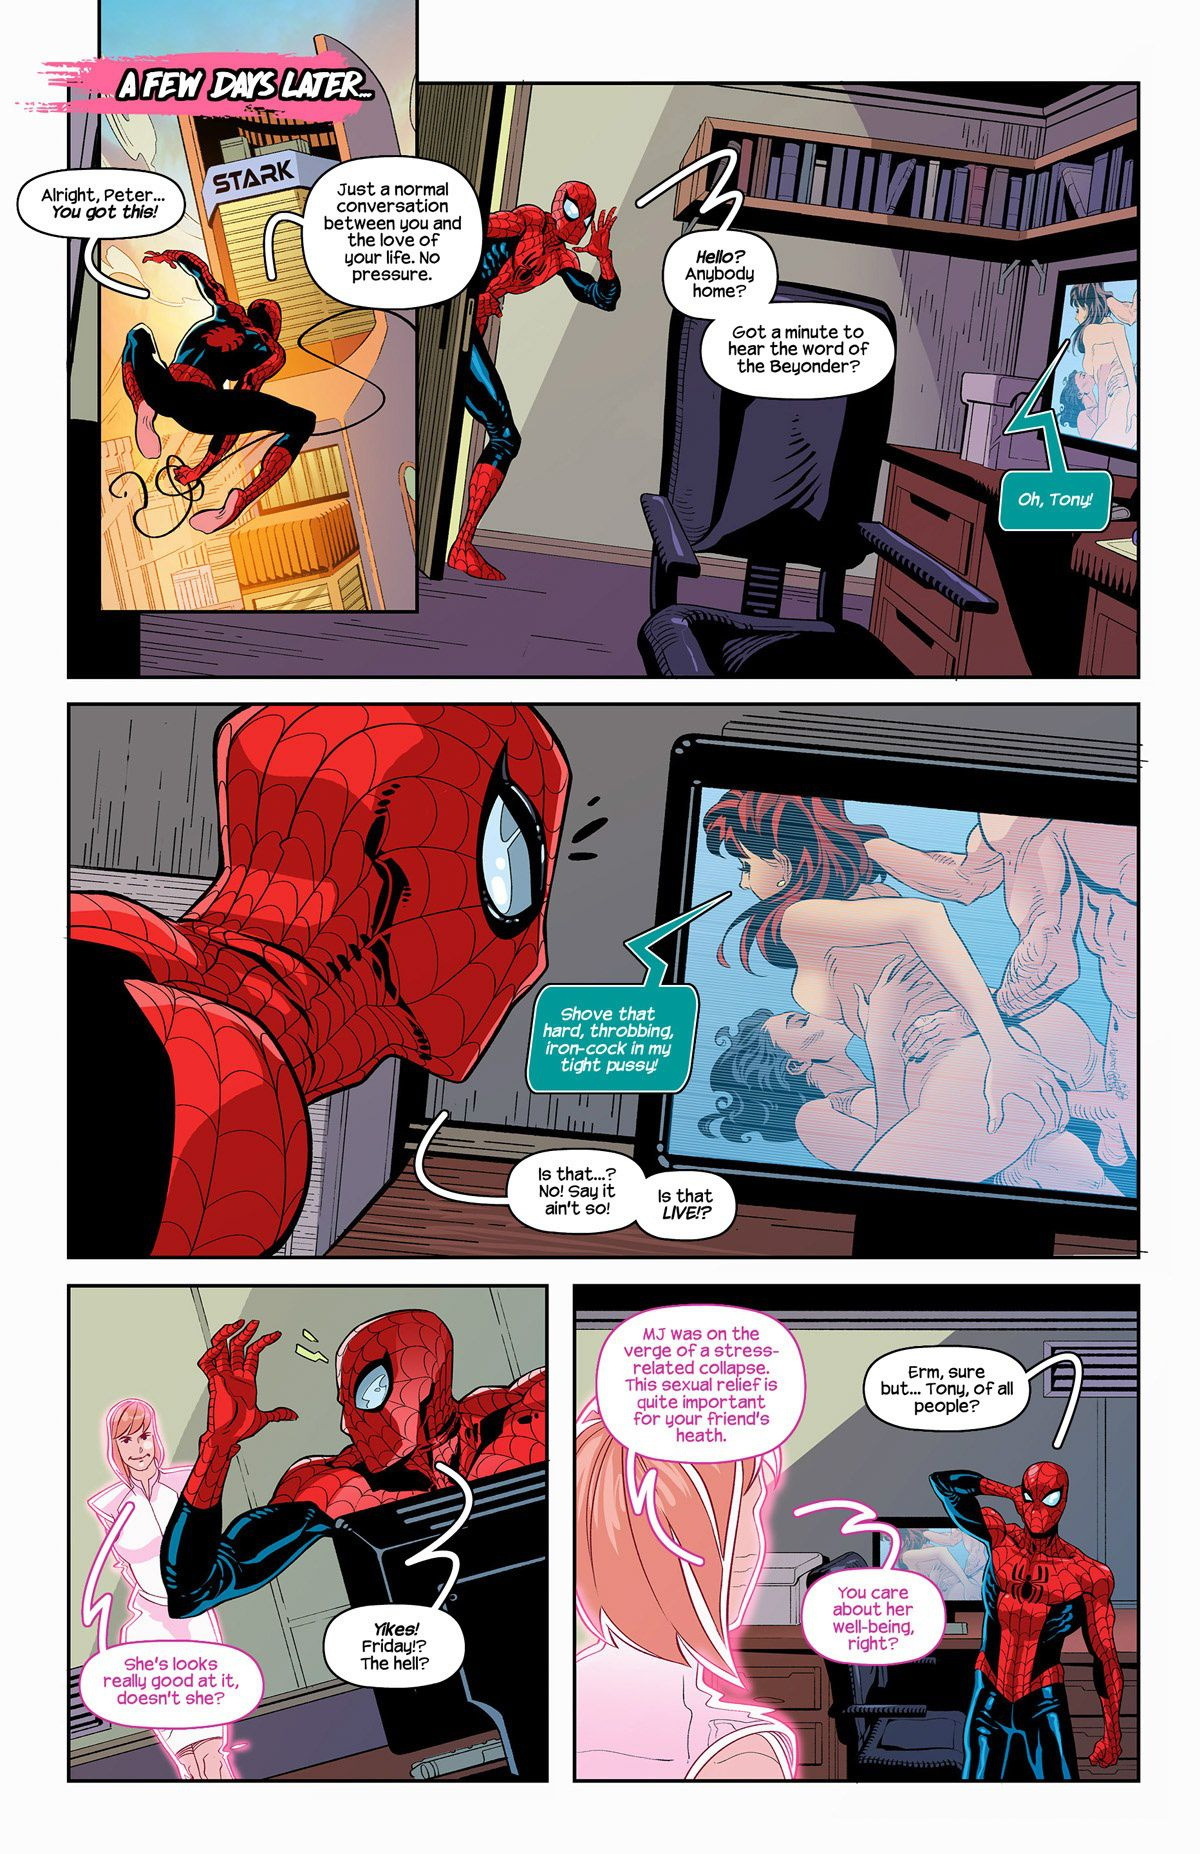 Invincible Iron Spider - Page 4